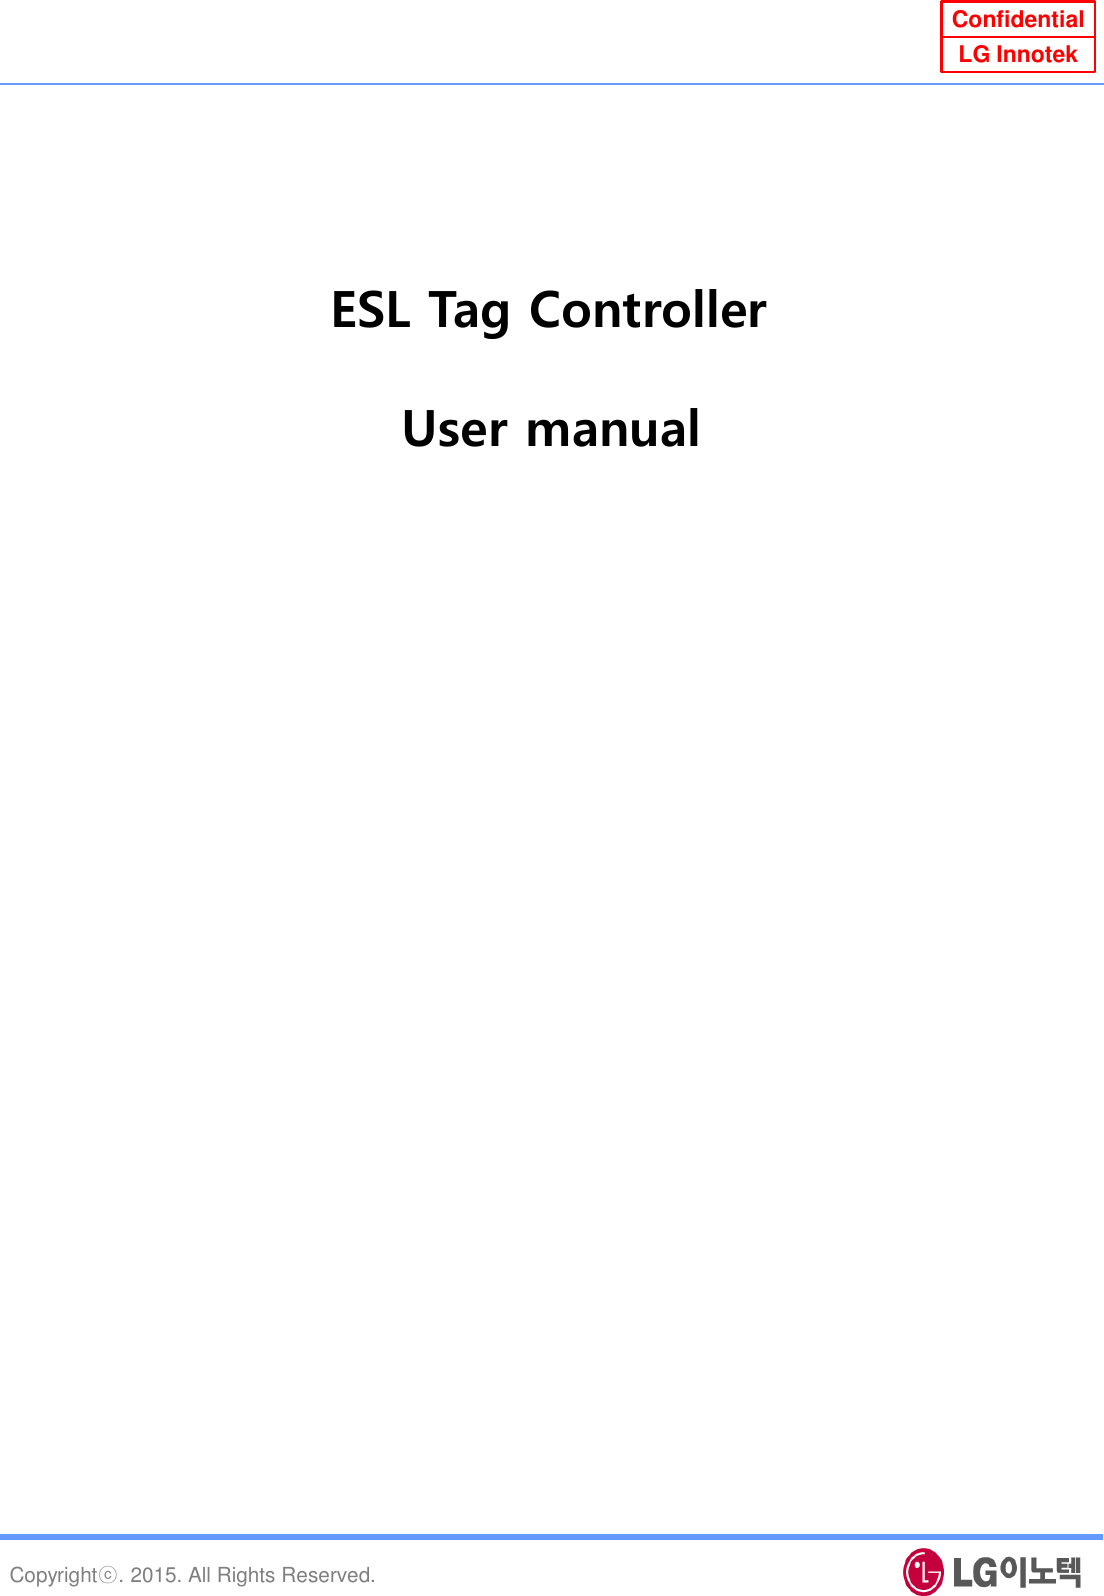 Copyrightⓒ. 2015. All Rights Reserved. Confidential LG Innotek ESL Tag Controller User manual 